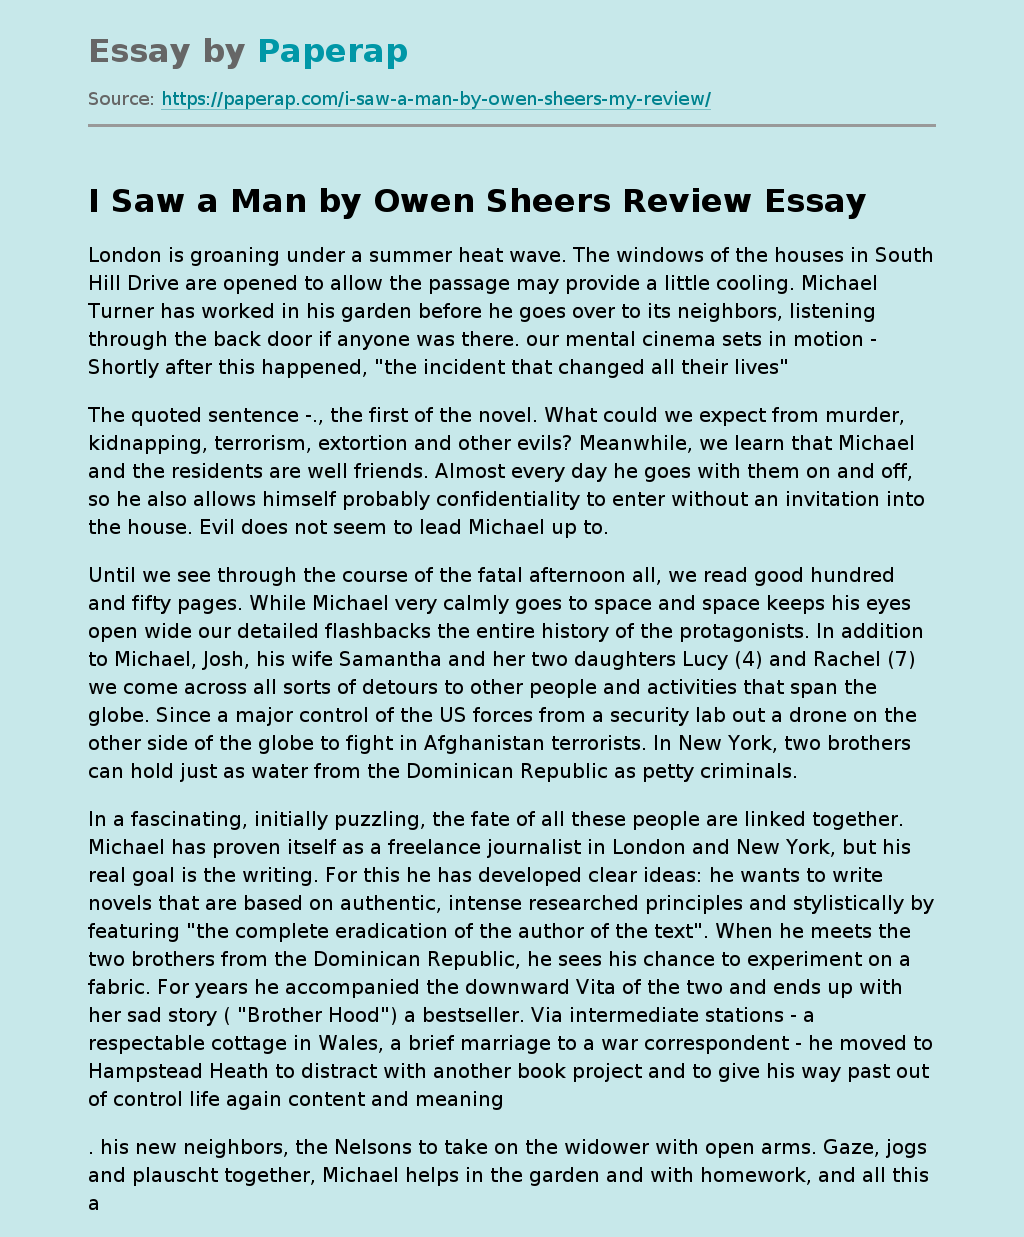 I Saw a Man by Owen Sheers Review